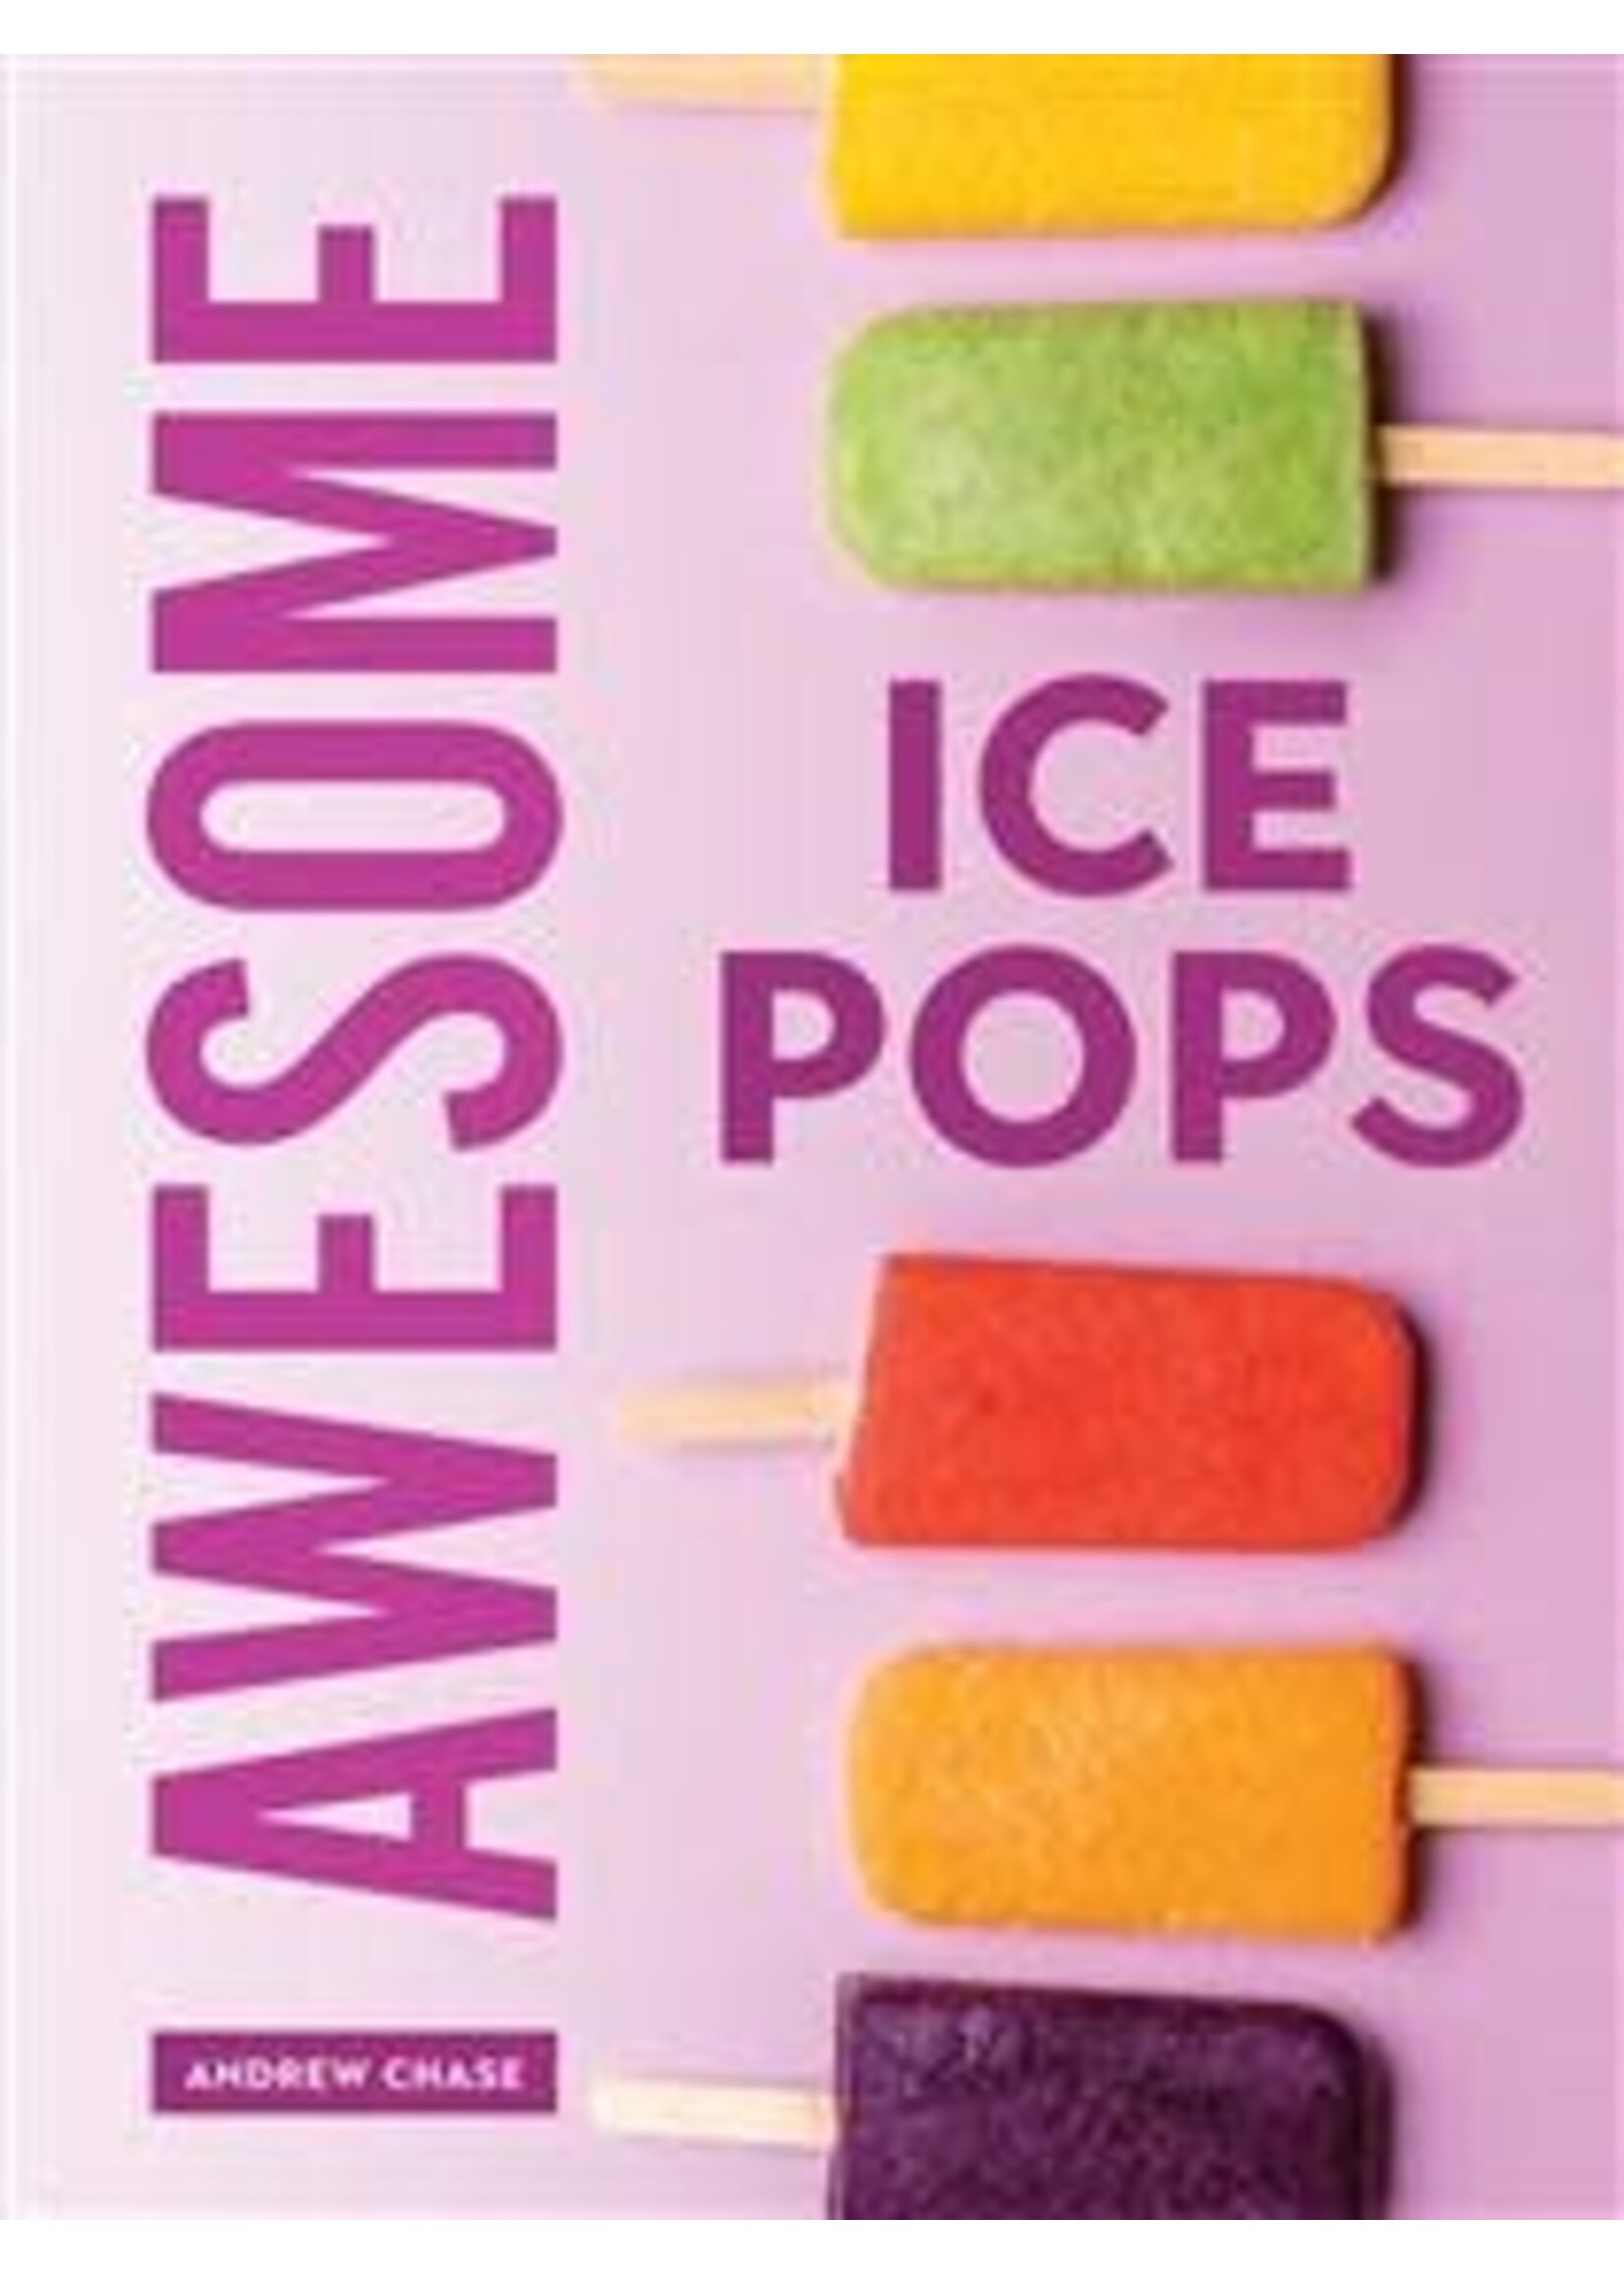 Awesome Ice Pops: 70 Cool Treats by Andrew Chase